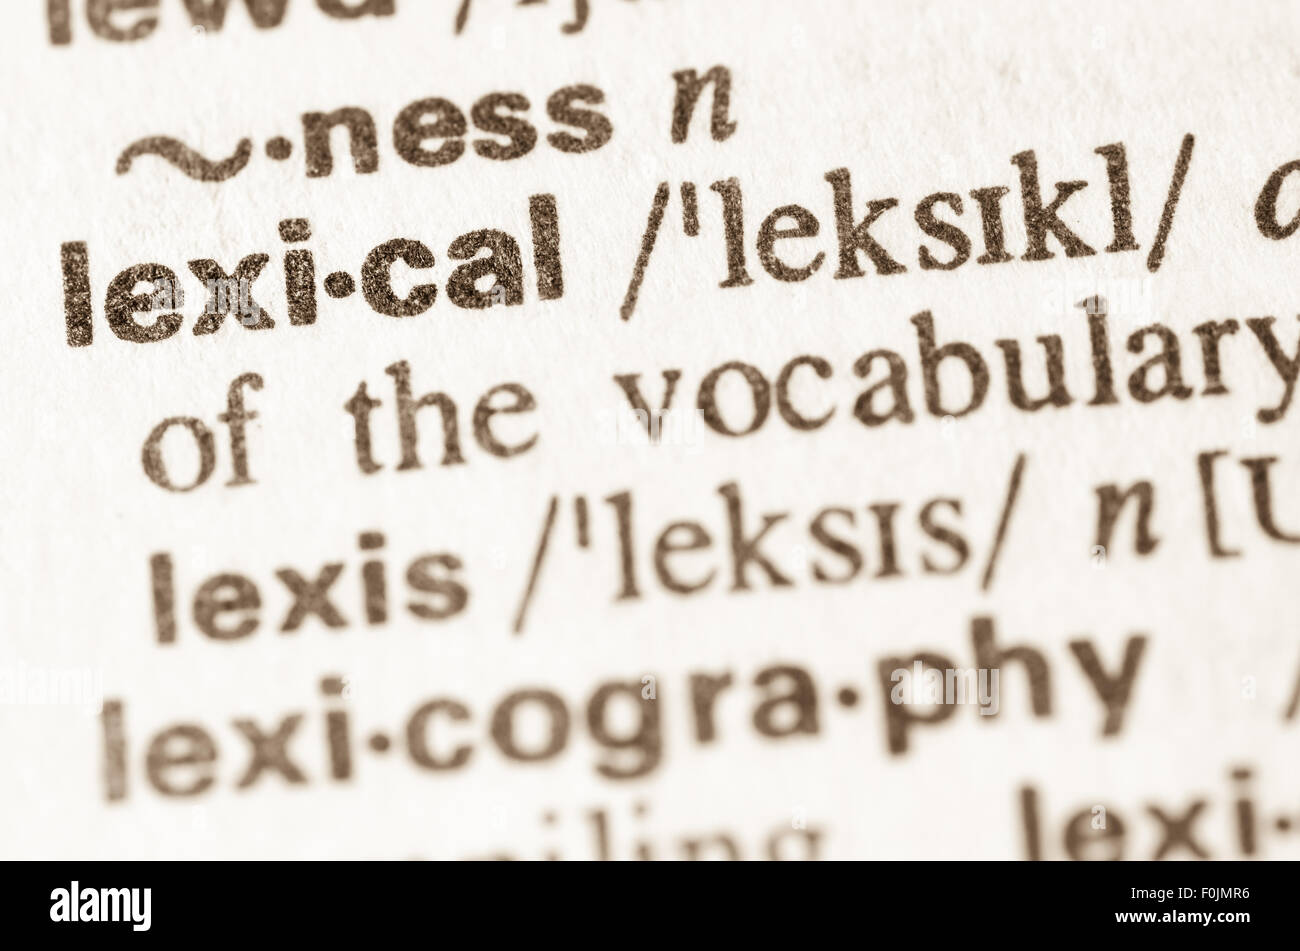 Definition of word lexical in dictionary Stock Photo